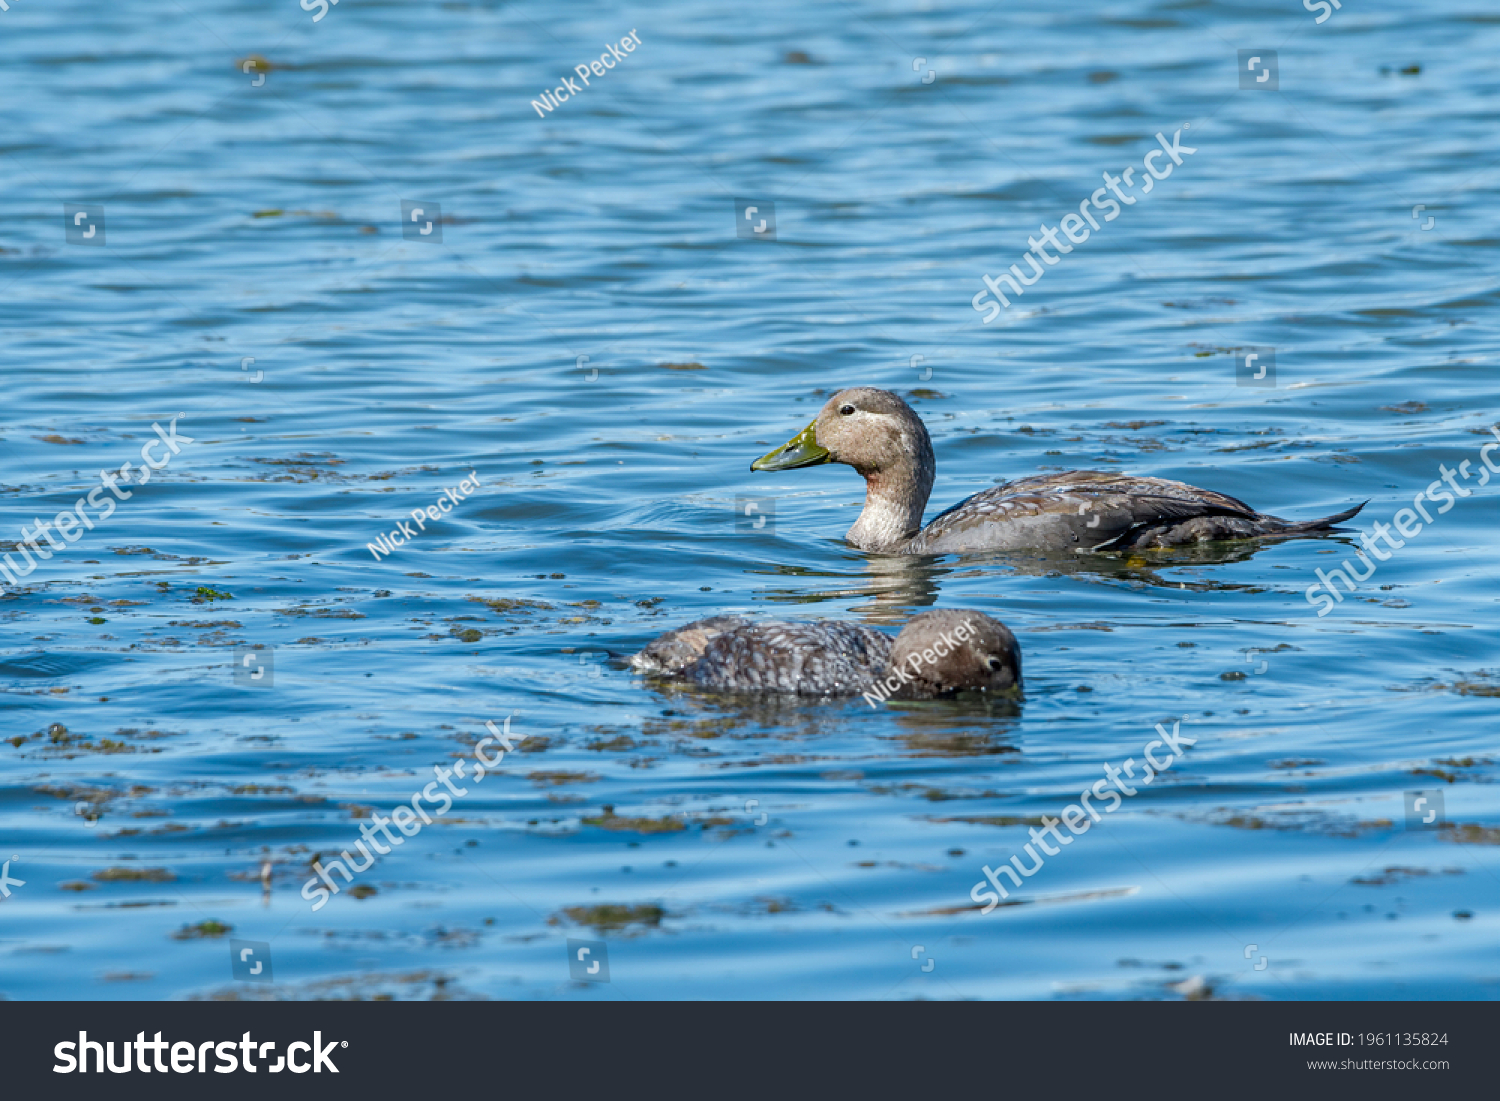 Female of Flying Steamer Duck (Tachyeres patachonicus) with duckling on lagoon in Ushuaia, Land of Fire (Tierra del Fuego), Argentina #1961135824